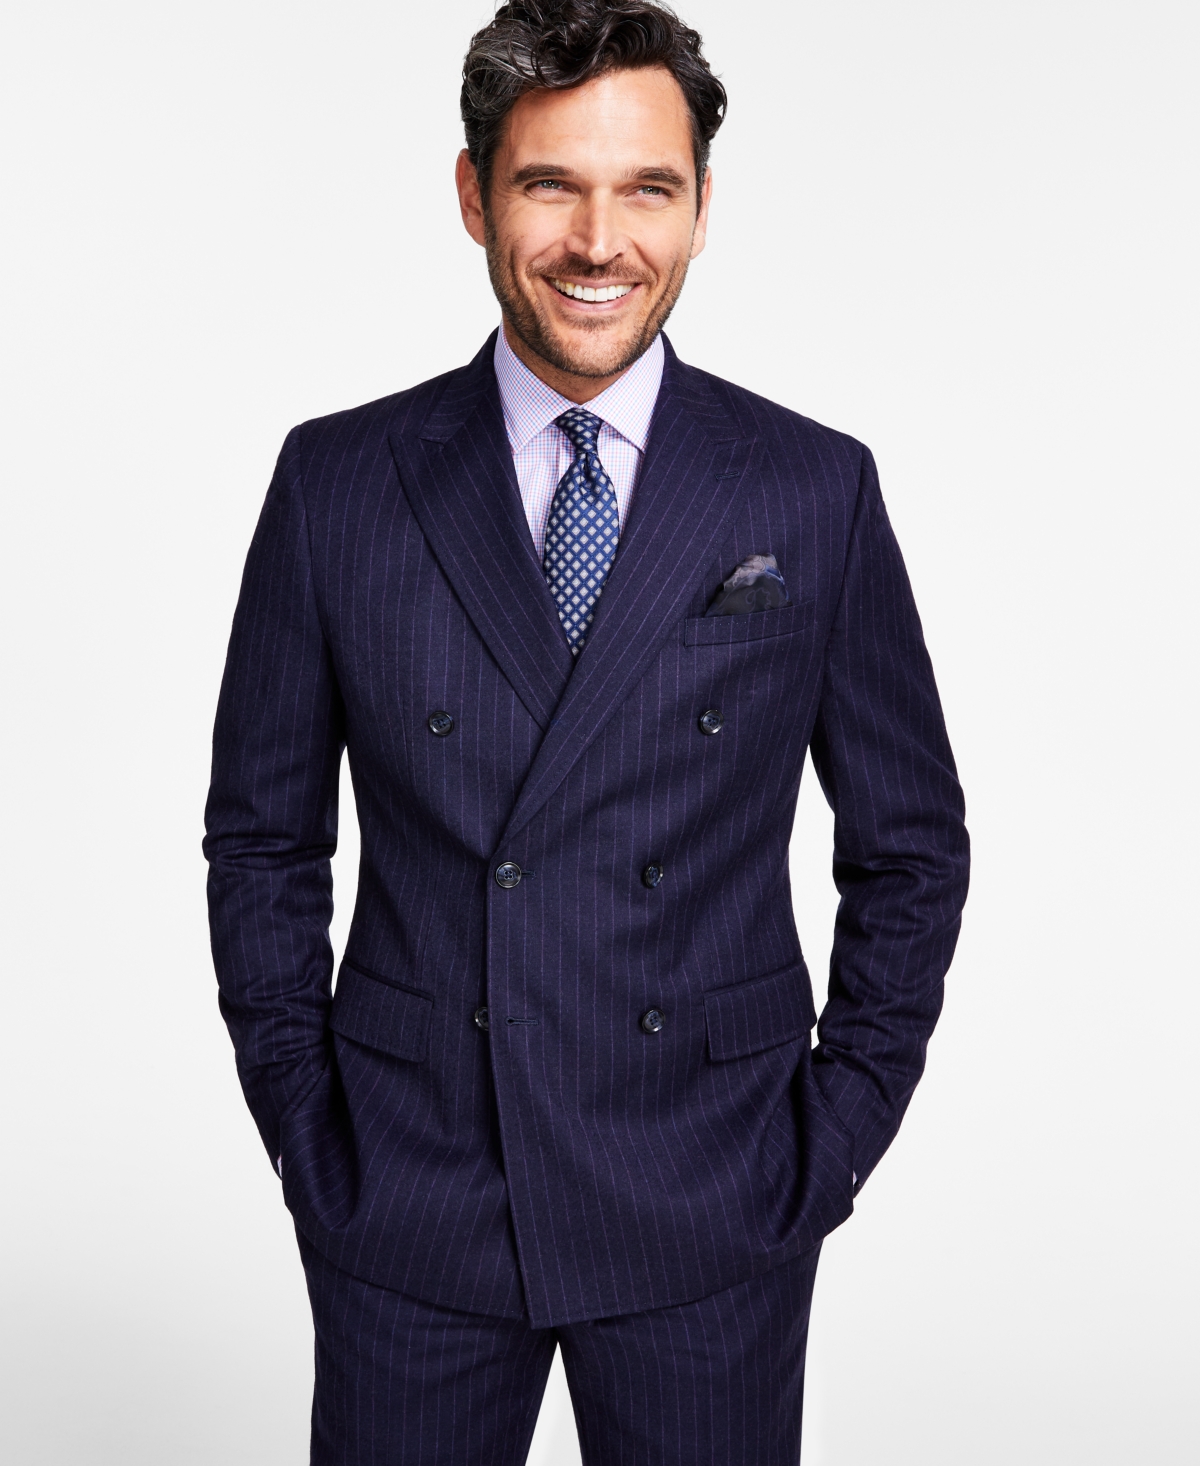 Men's Slim-Fit Stretch Pinstripe Double-Breasted Suit Jacket - Navy Pinstripe